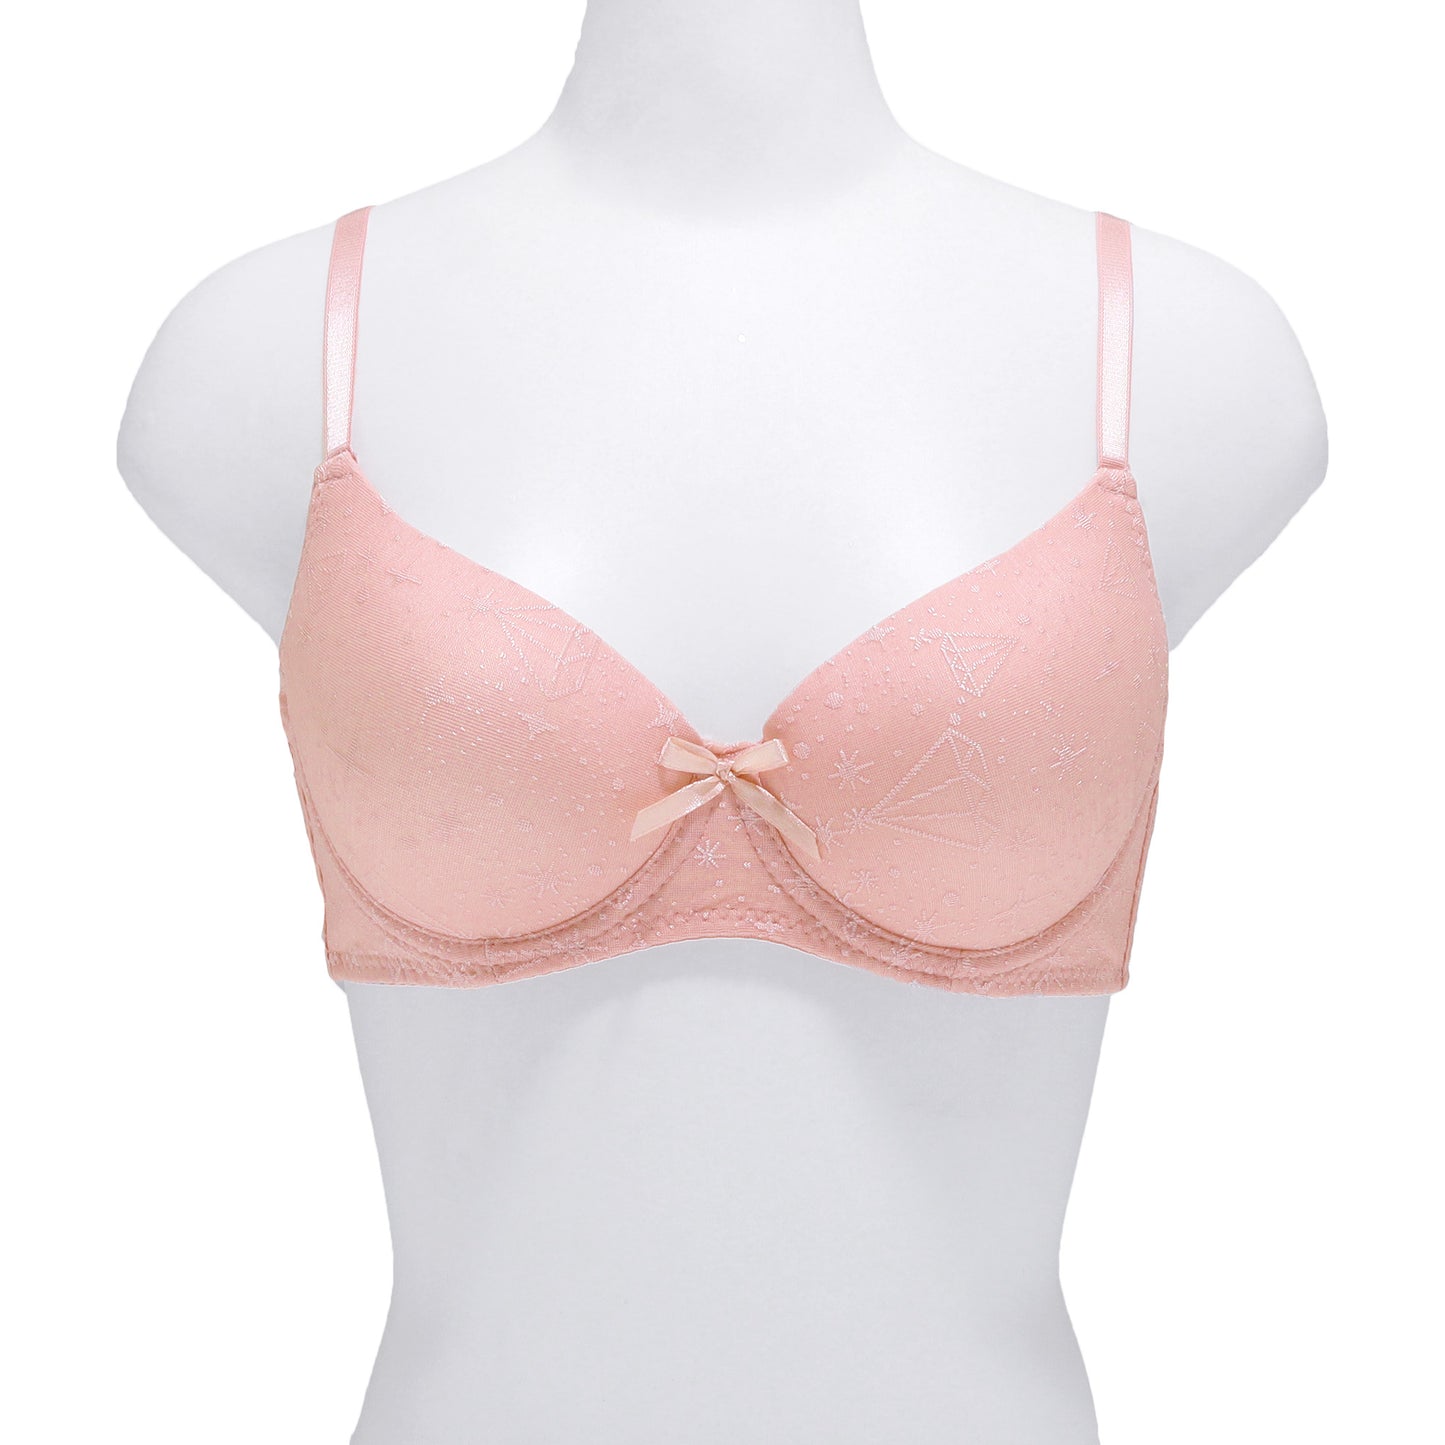 Angelina Wired A-Cup Bras with Embroidered Diamond Design (6-Pack), #B376A